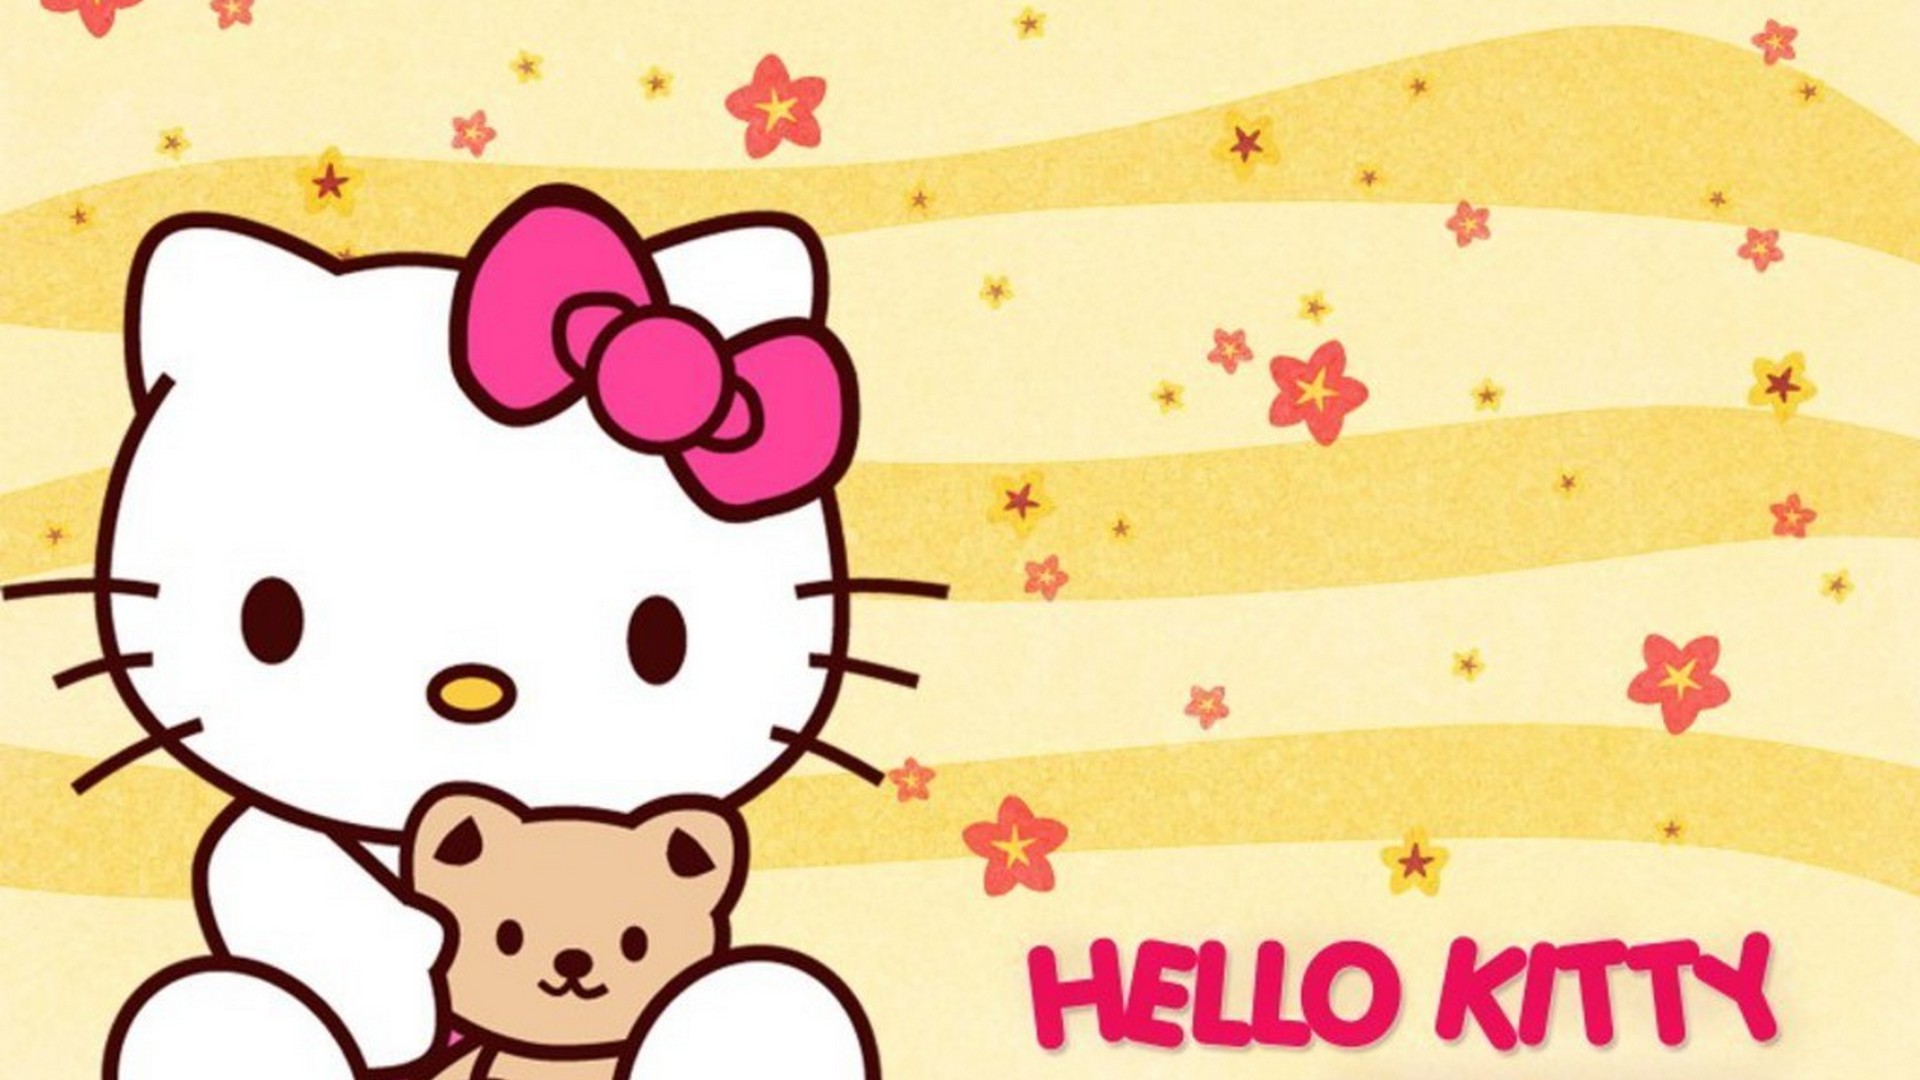 HD Hello Kitty Backgrounds with resolution 1920X1080 pixel. You can use this wallpaper as background for your desktop Computer Screensavers, Android or iPhone smartphones